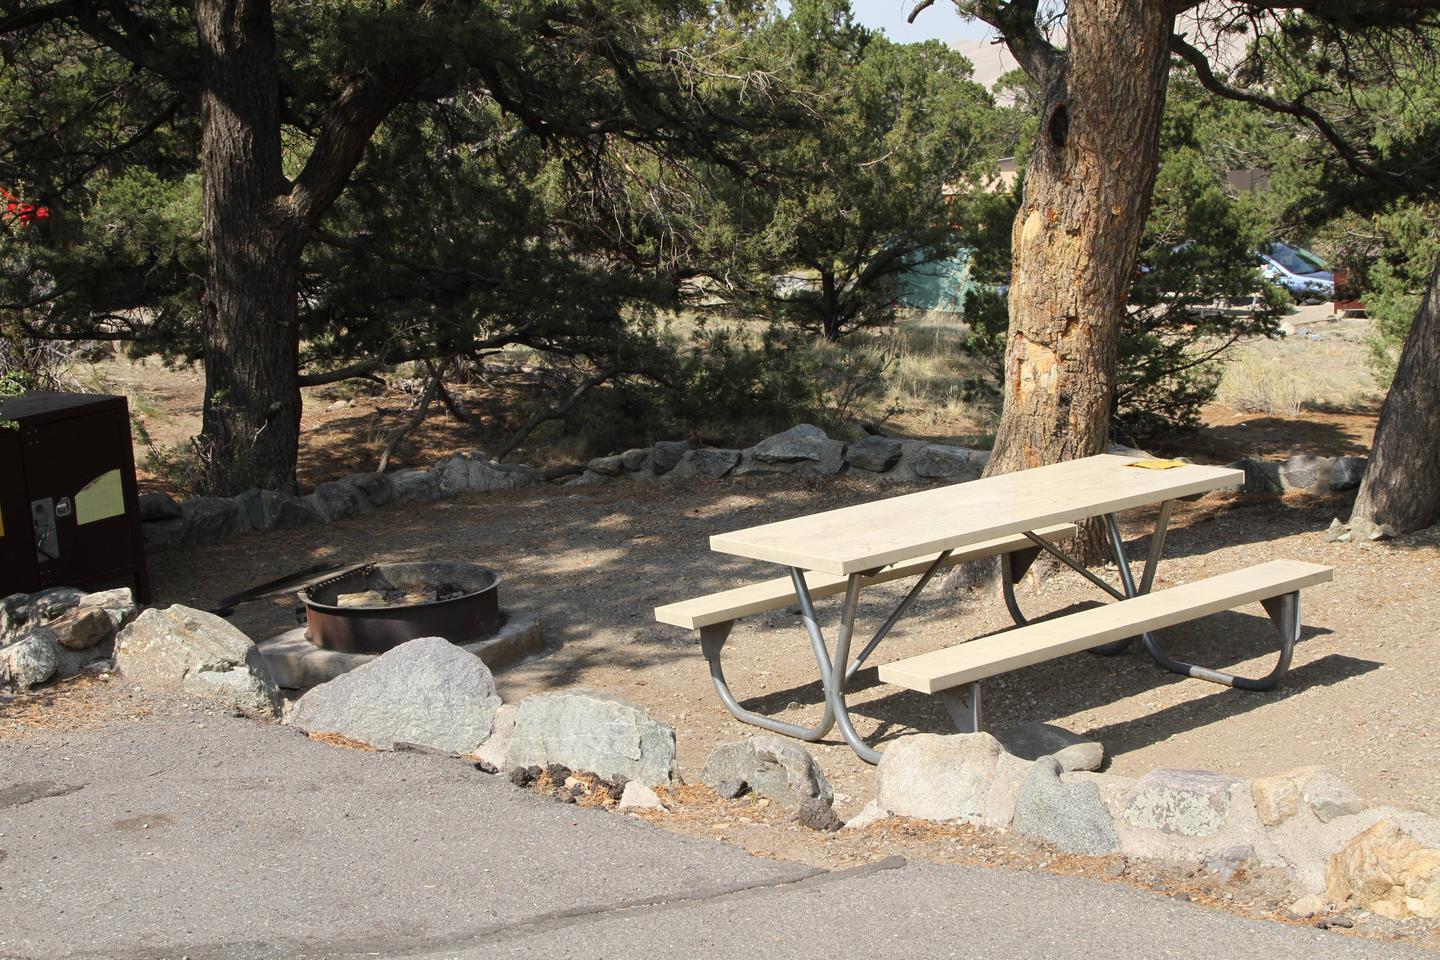 Close up view of Site #76 tent pad with picnic table, bear box, and fire ring. Several large trees can been seen both inside and outside of the rock wall boundary.Site #76, Pinon Flats Campground